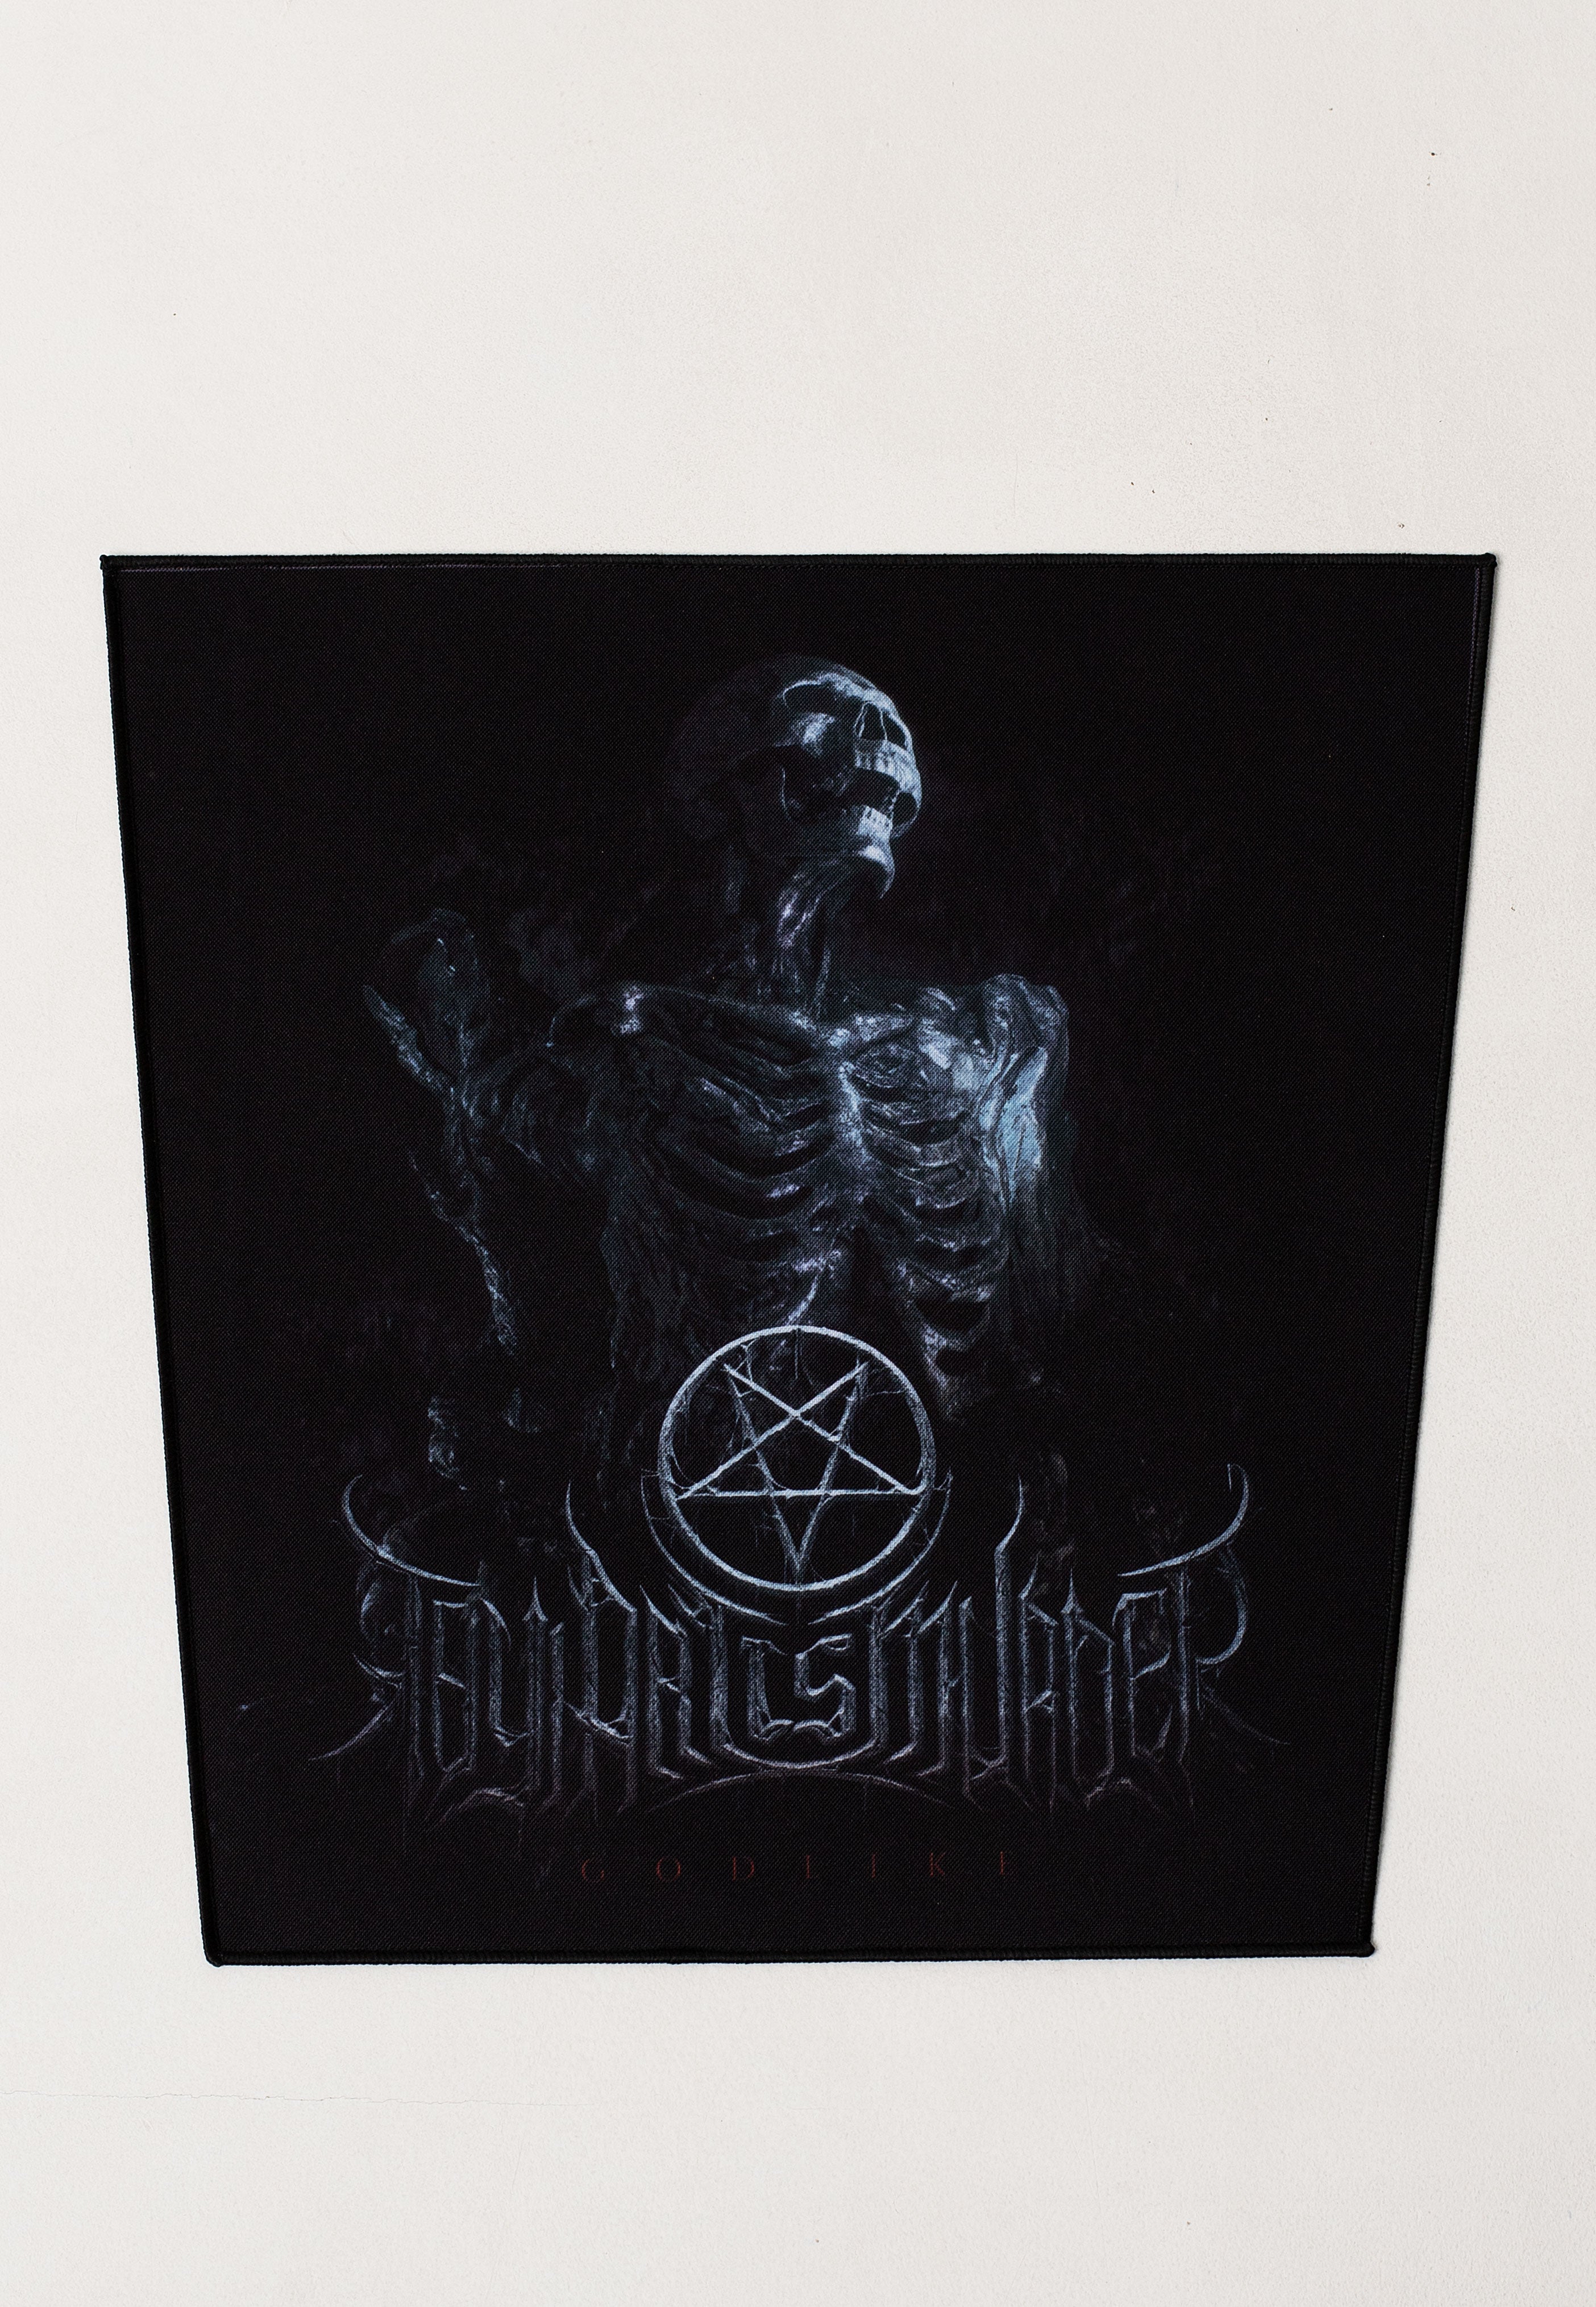 Thy Art Is Murder merch available online in the Nuclear Blast shop